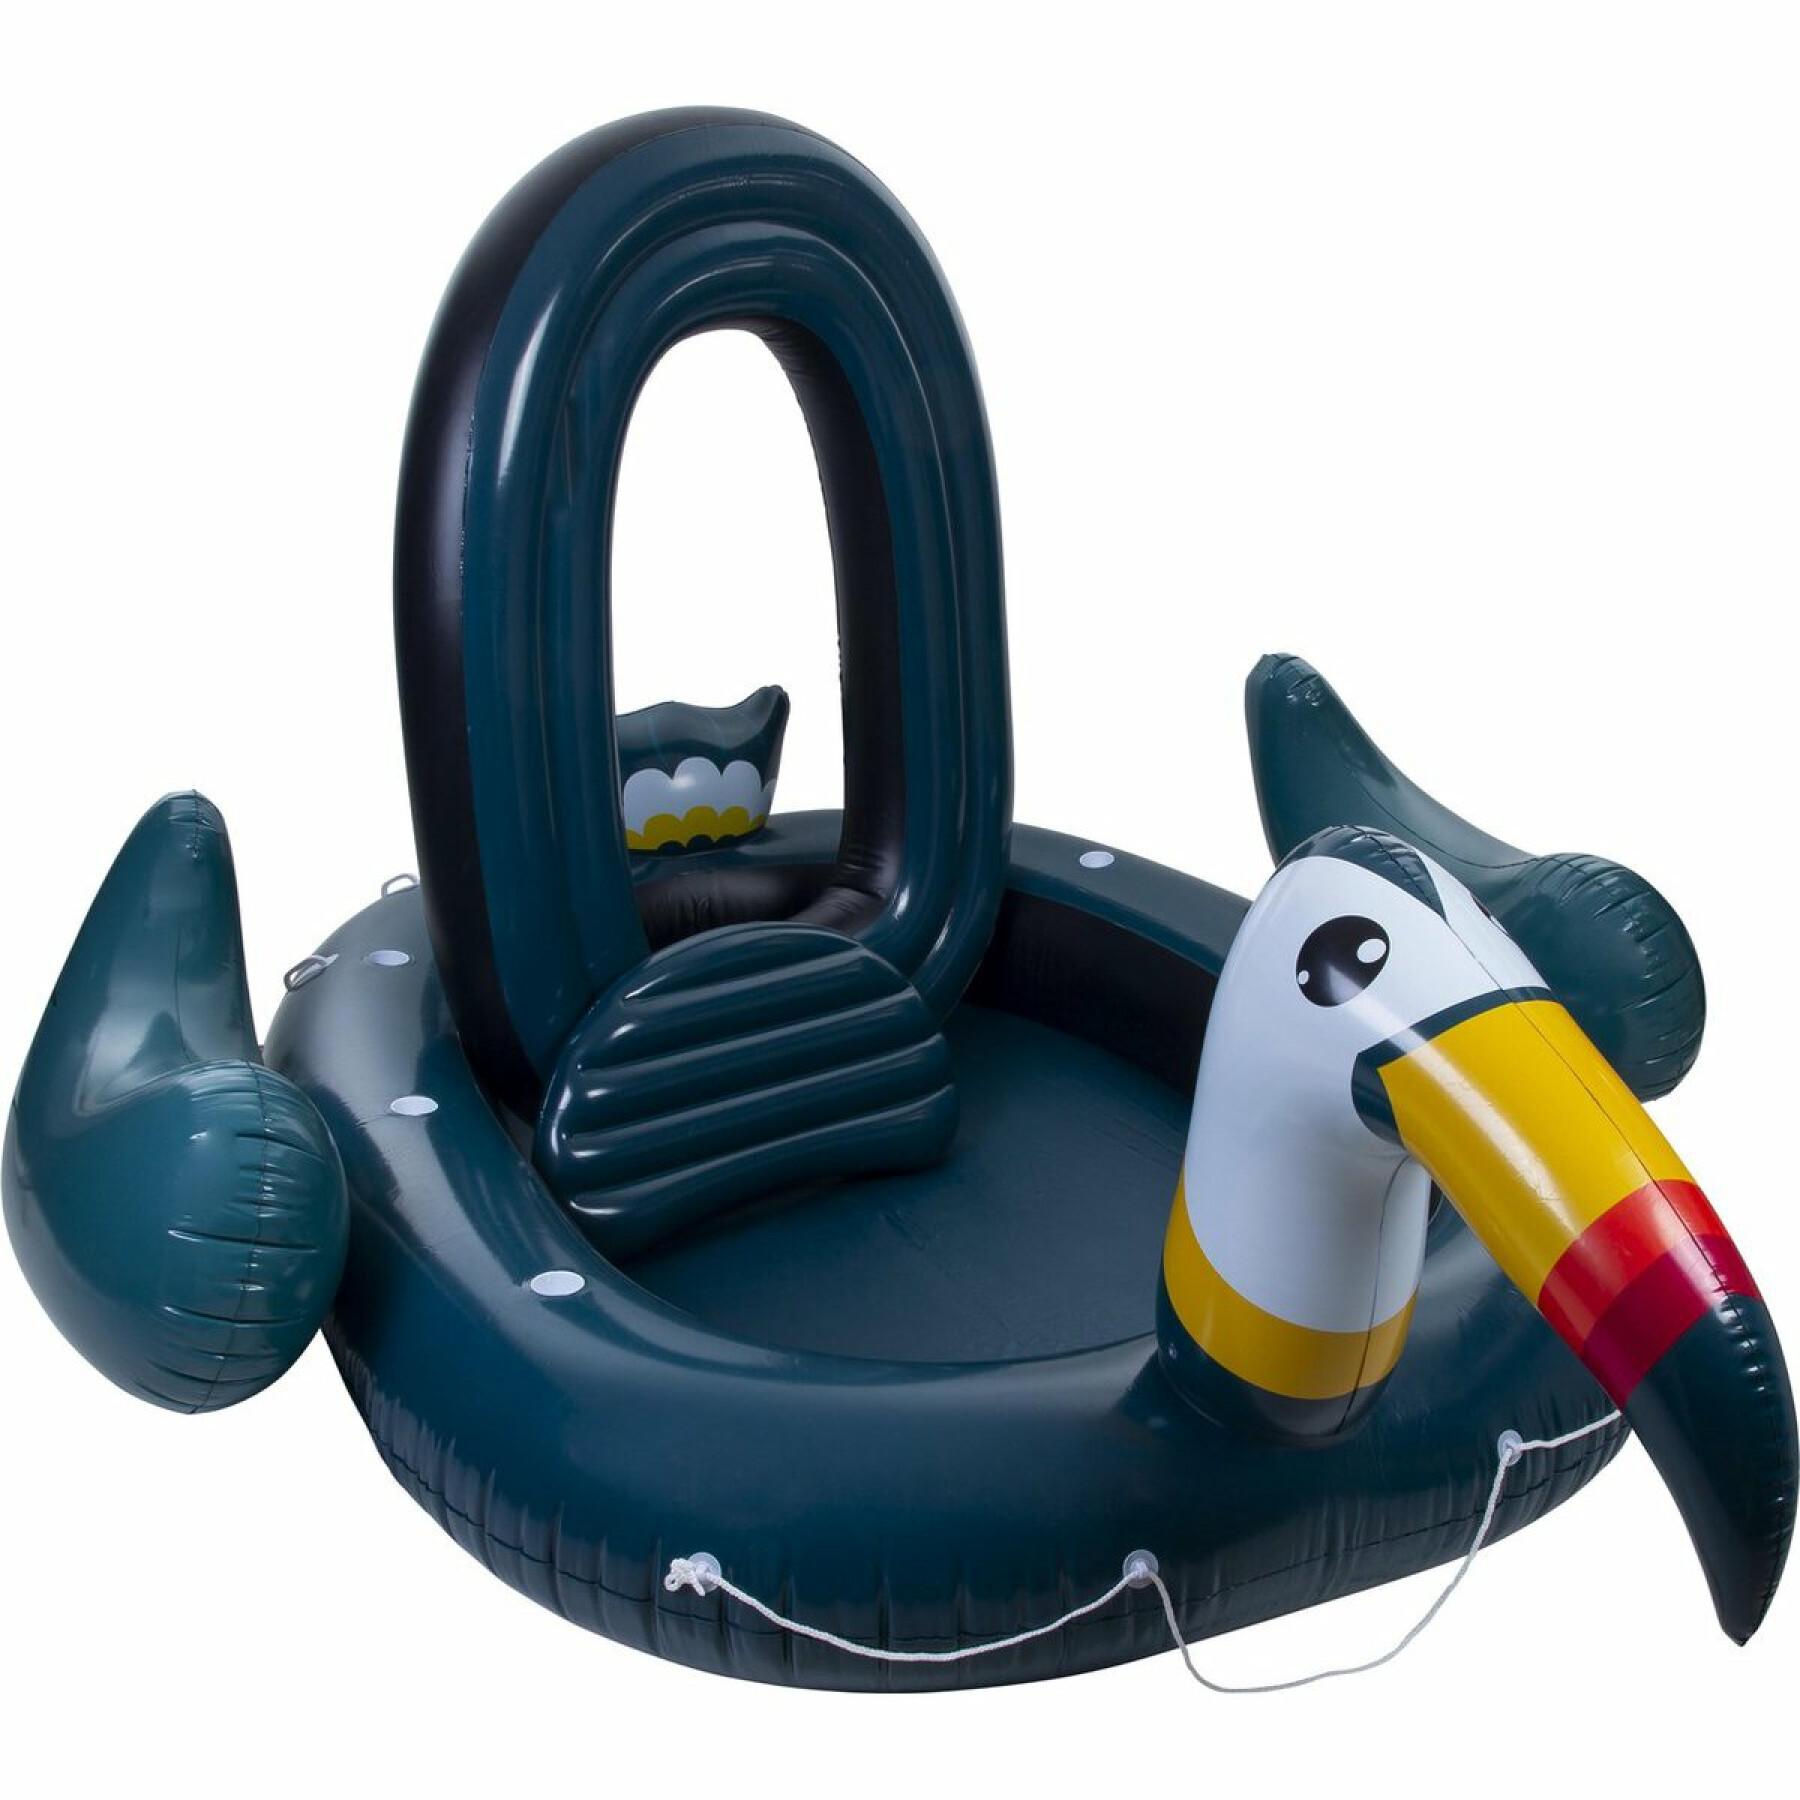 Bateau gonflable The Pure4Fun Toucan